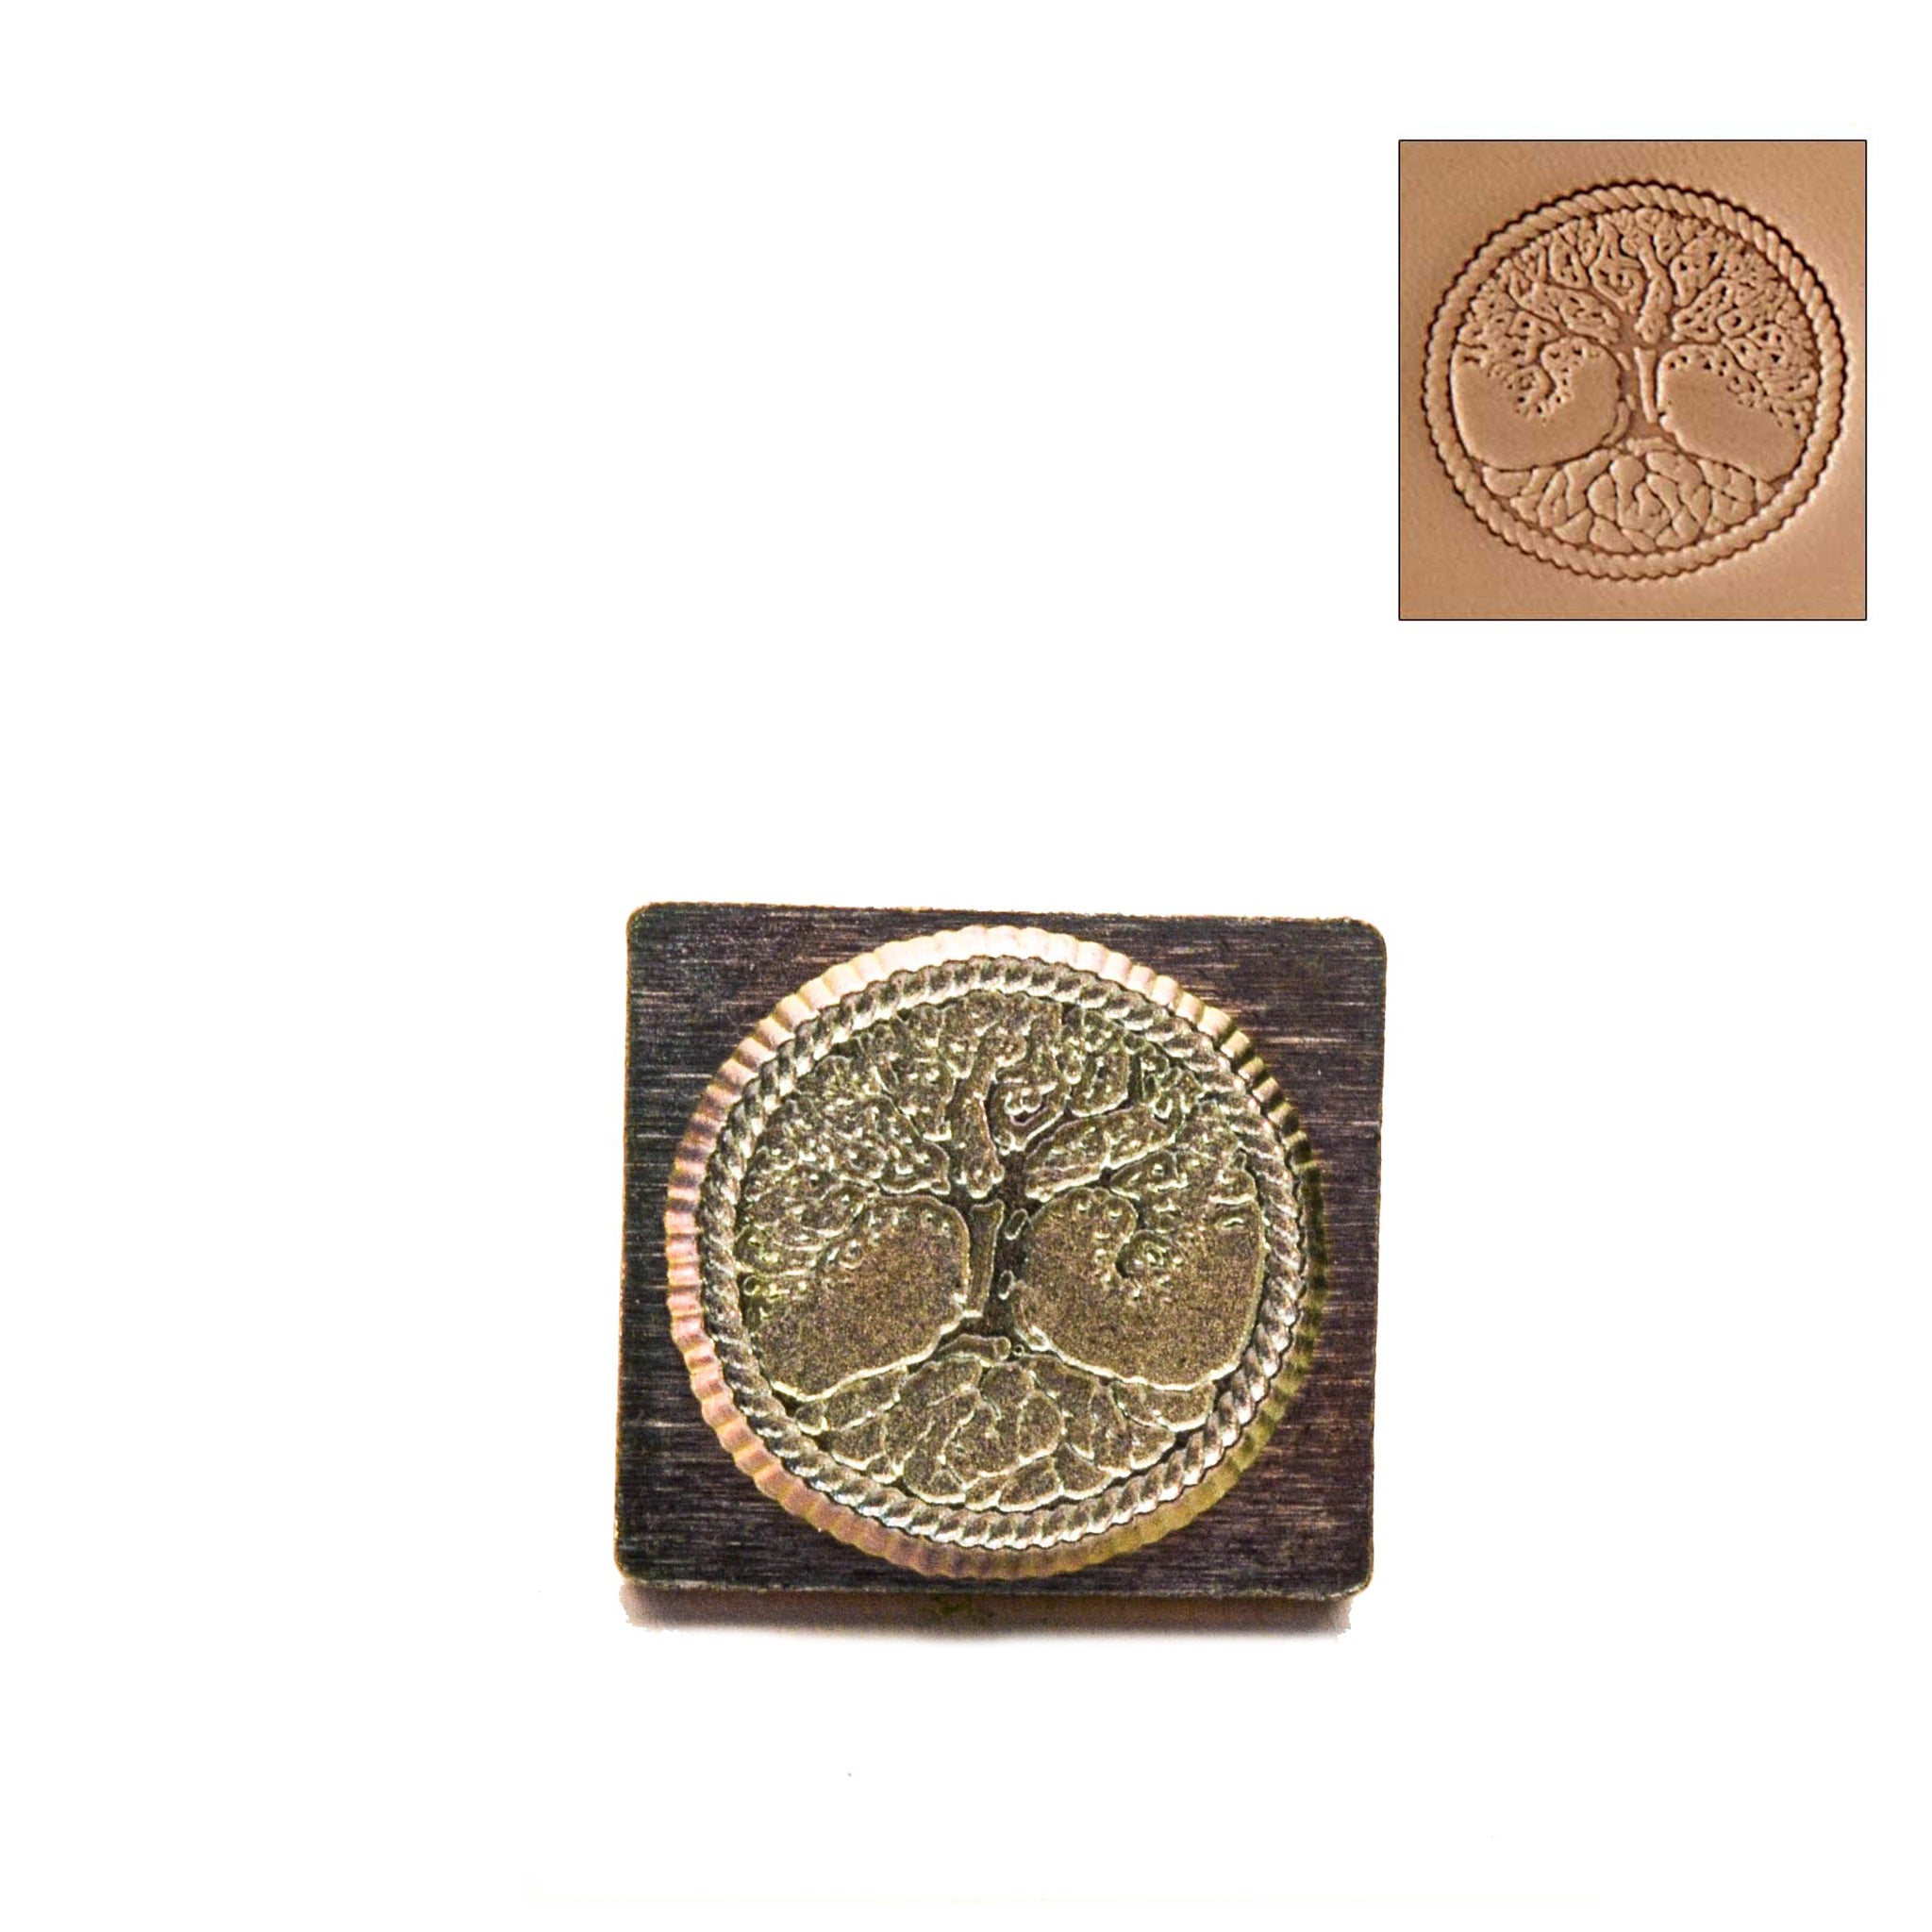 Tree of Life 3D Embossing Stamp from Identity Leathercraft